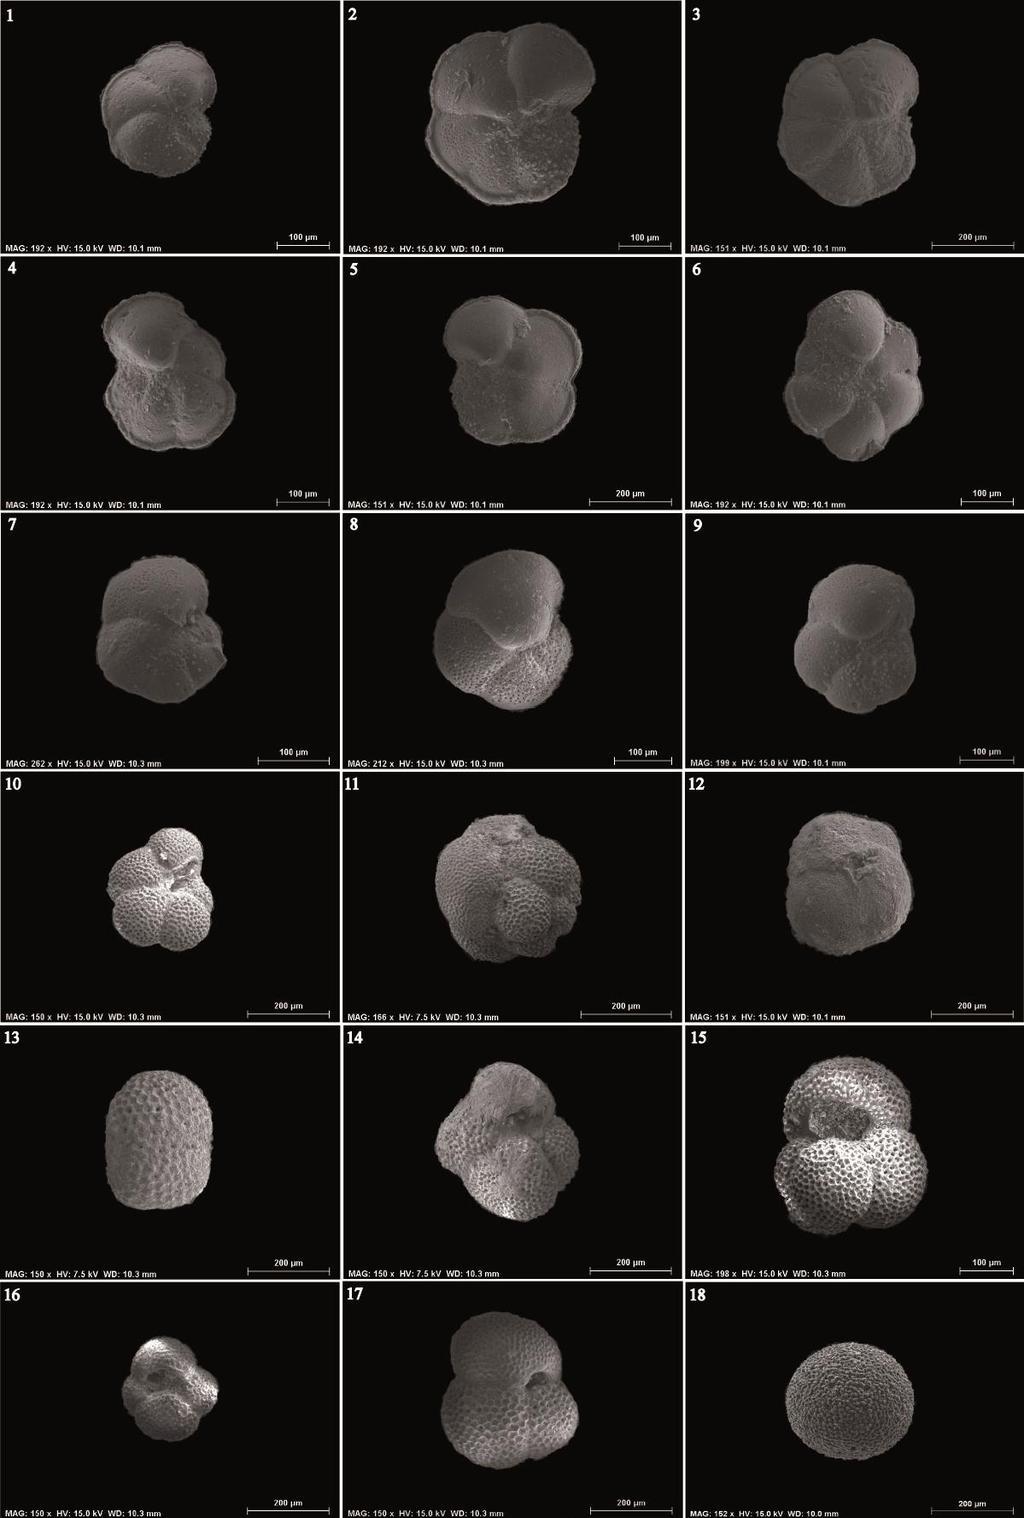 100 Amakrane et al. - Paleoenvironment, sequence stratigraphy of the late Miocene, Guercif basin, Morocco Figure 3. Scanning Electron Microscopy (SEM) images of planktonic foraminifera. 1-3.